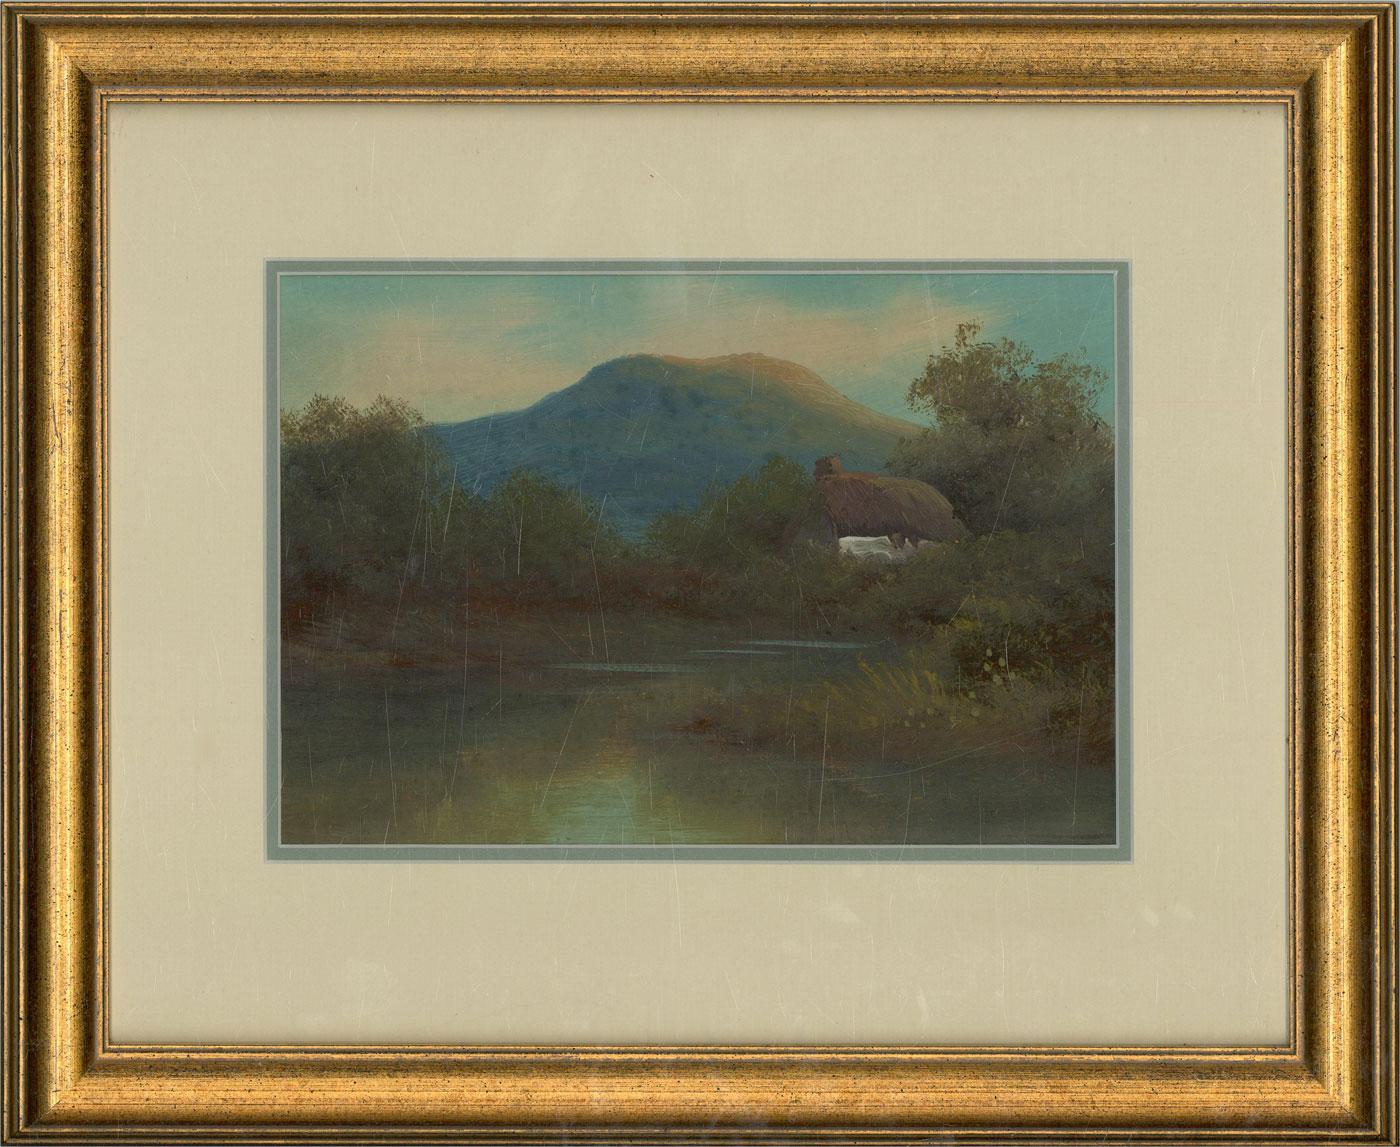 Impastoed gouache is used to depict a quiet river leading to a countryside cottage on a still evening. The artwork is unsigned and well presented in a gilded wood frame with a white and blue double mount. On wove.